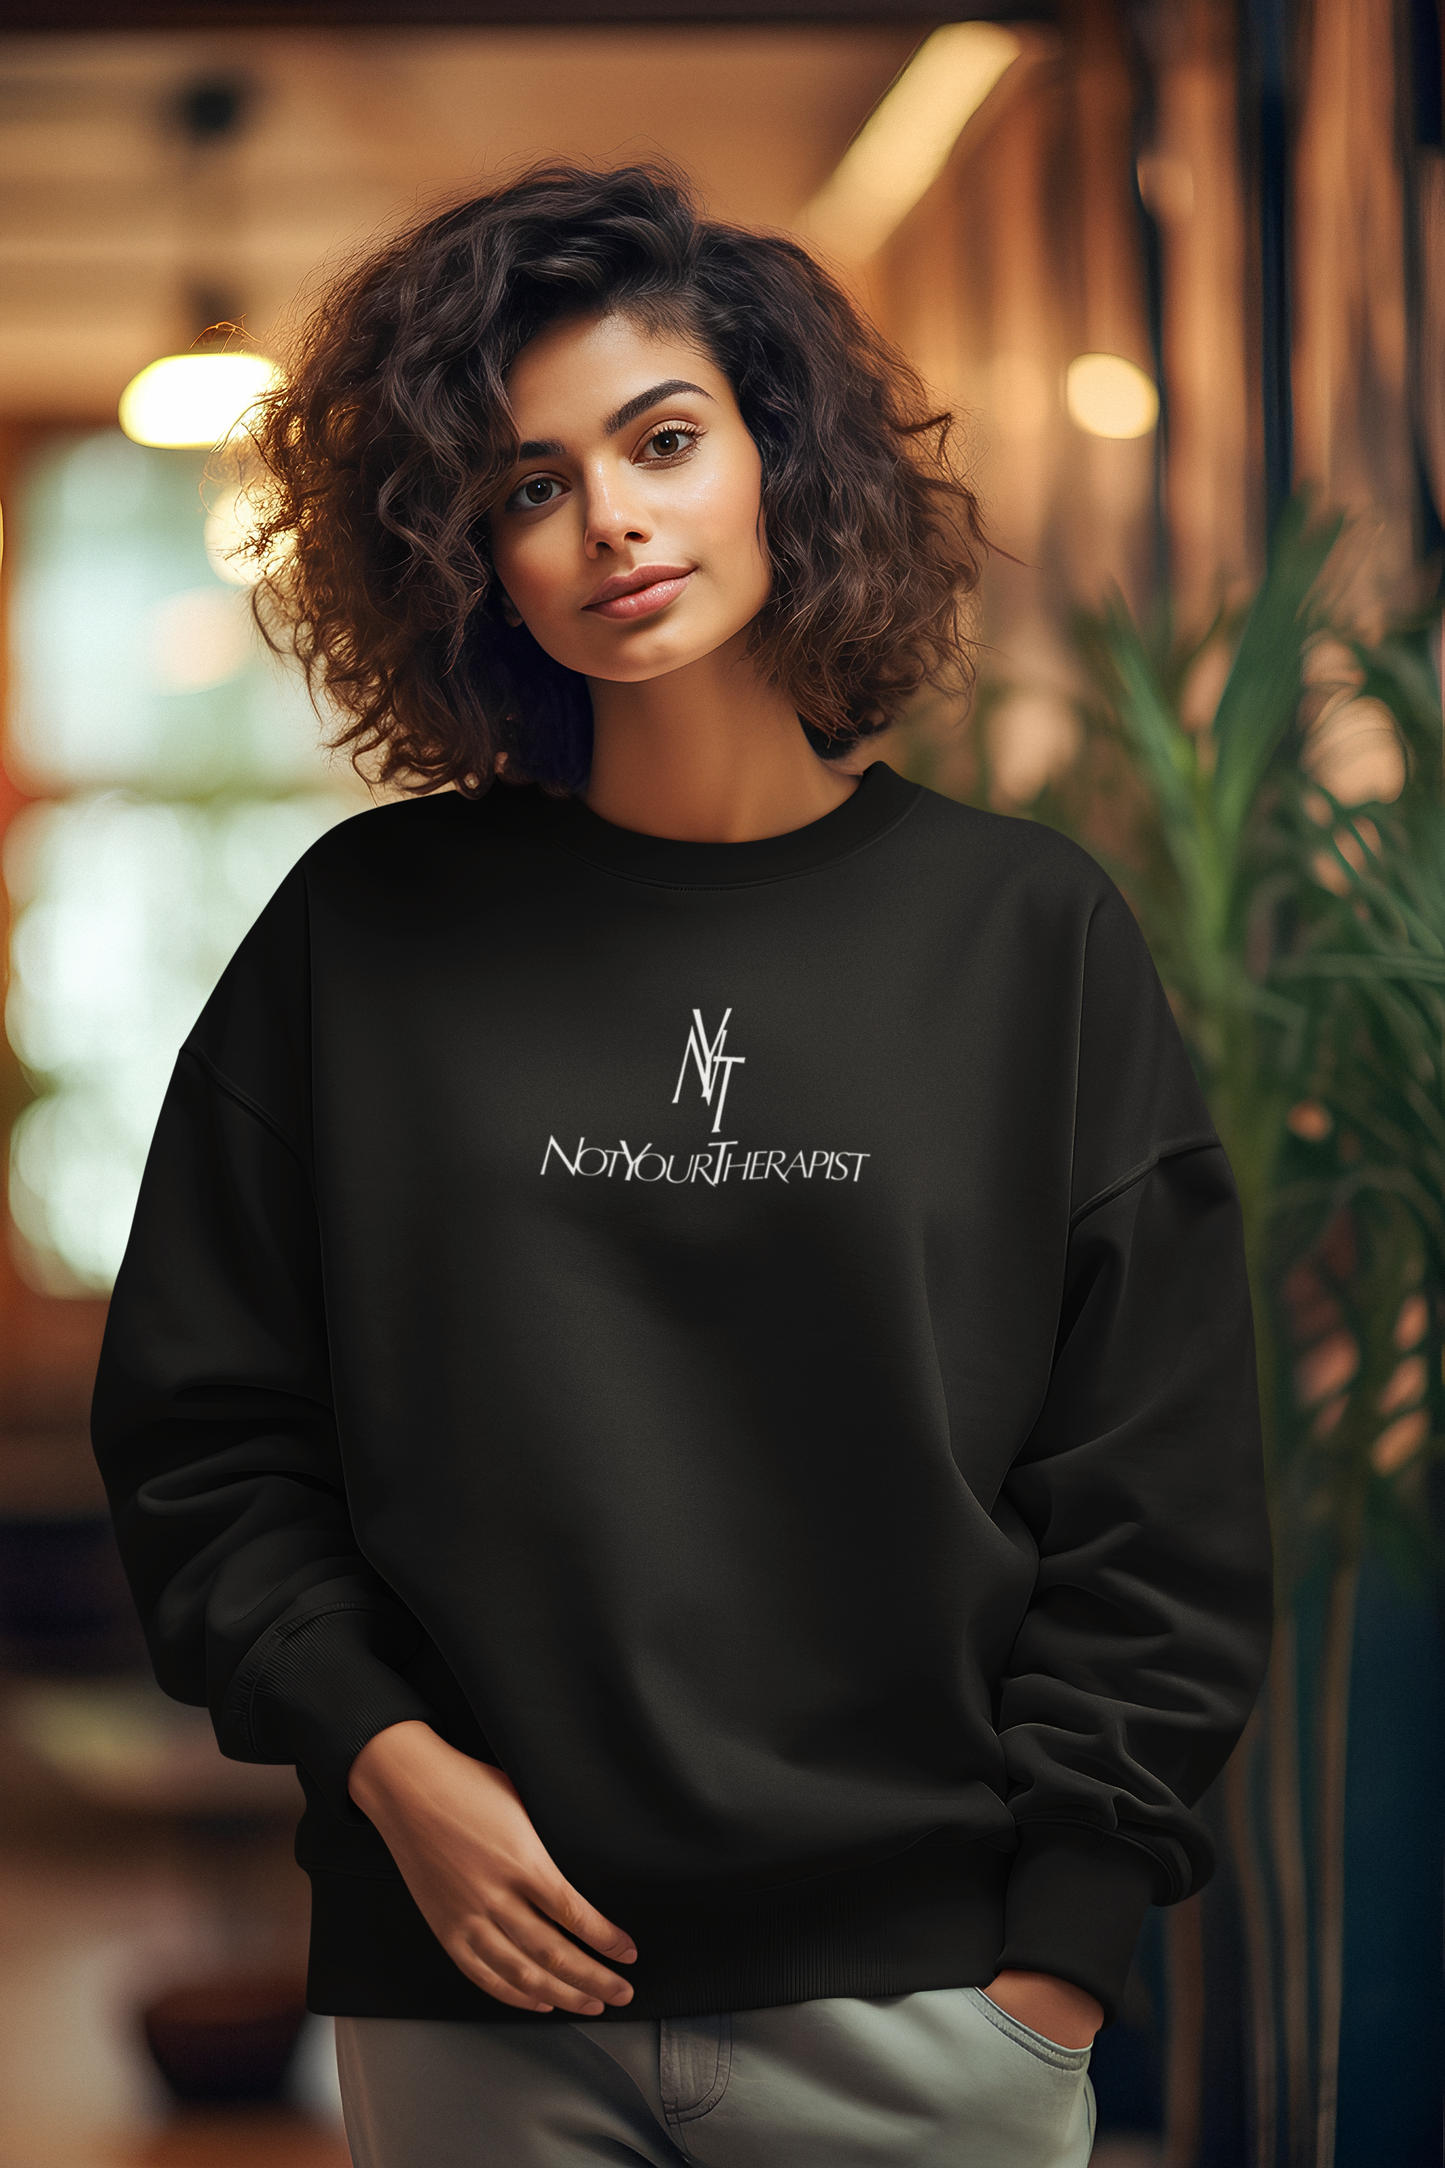 NYT NOT YOUR THERAPIST - Unisex Days Off Collection